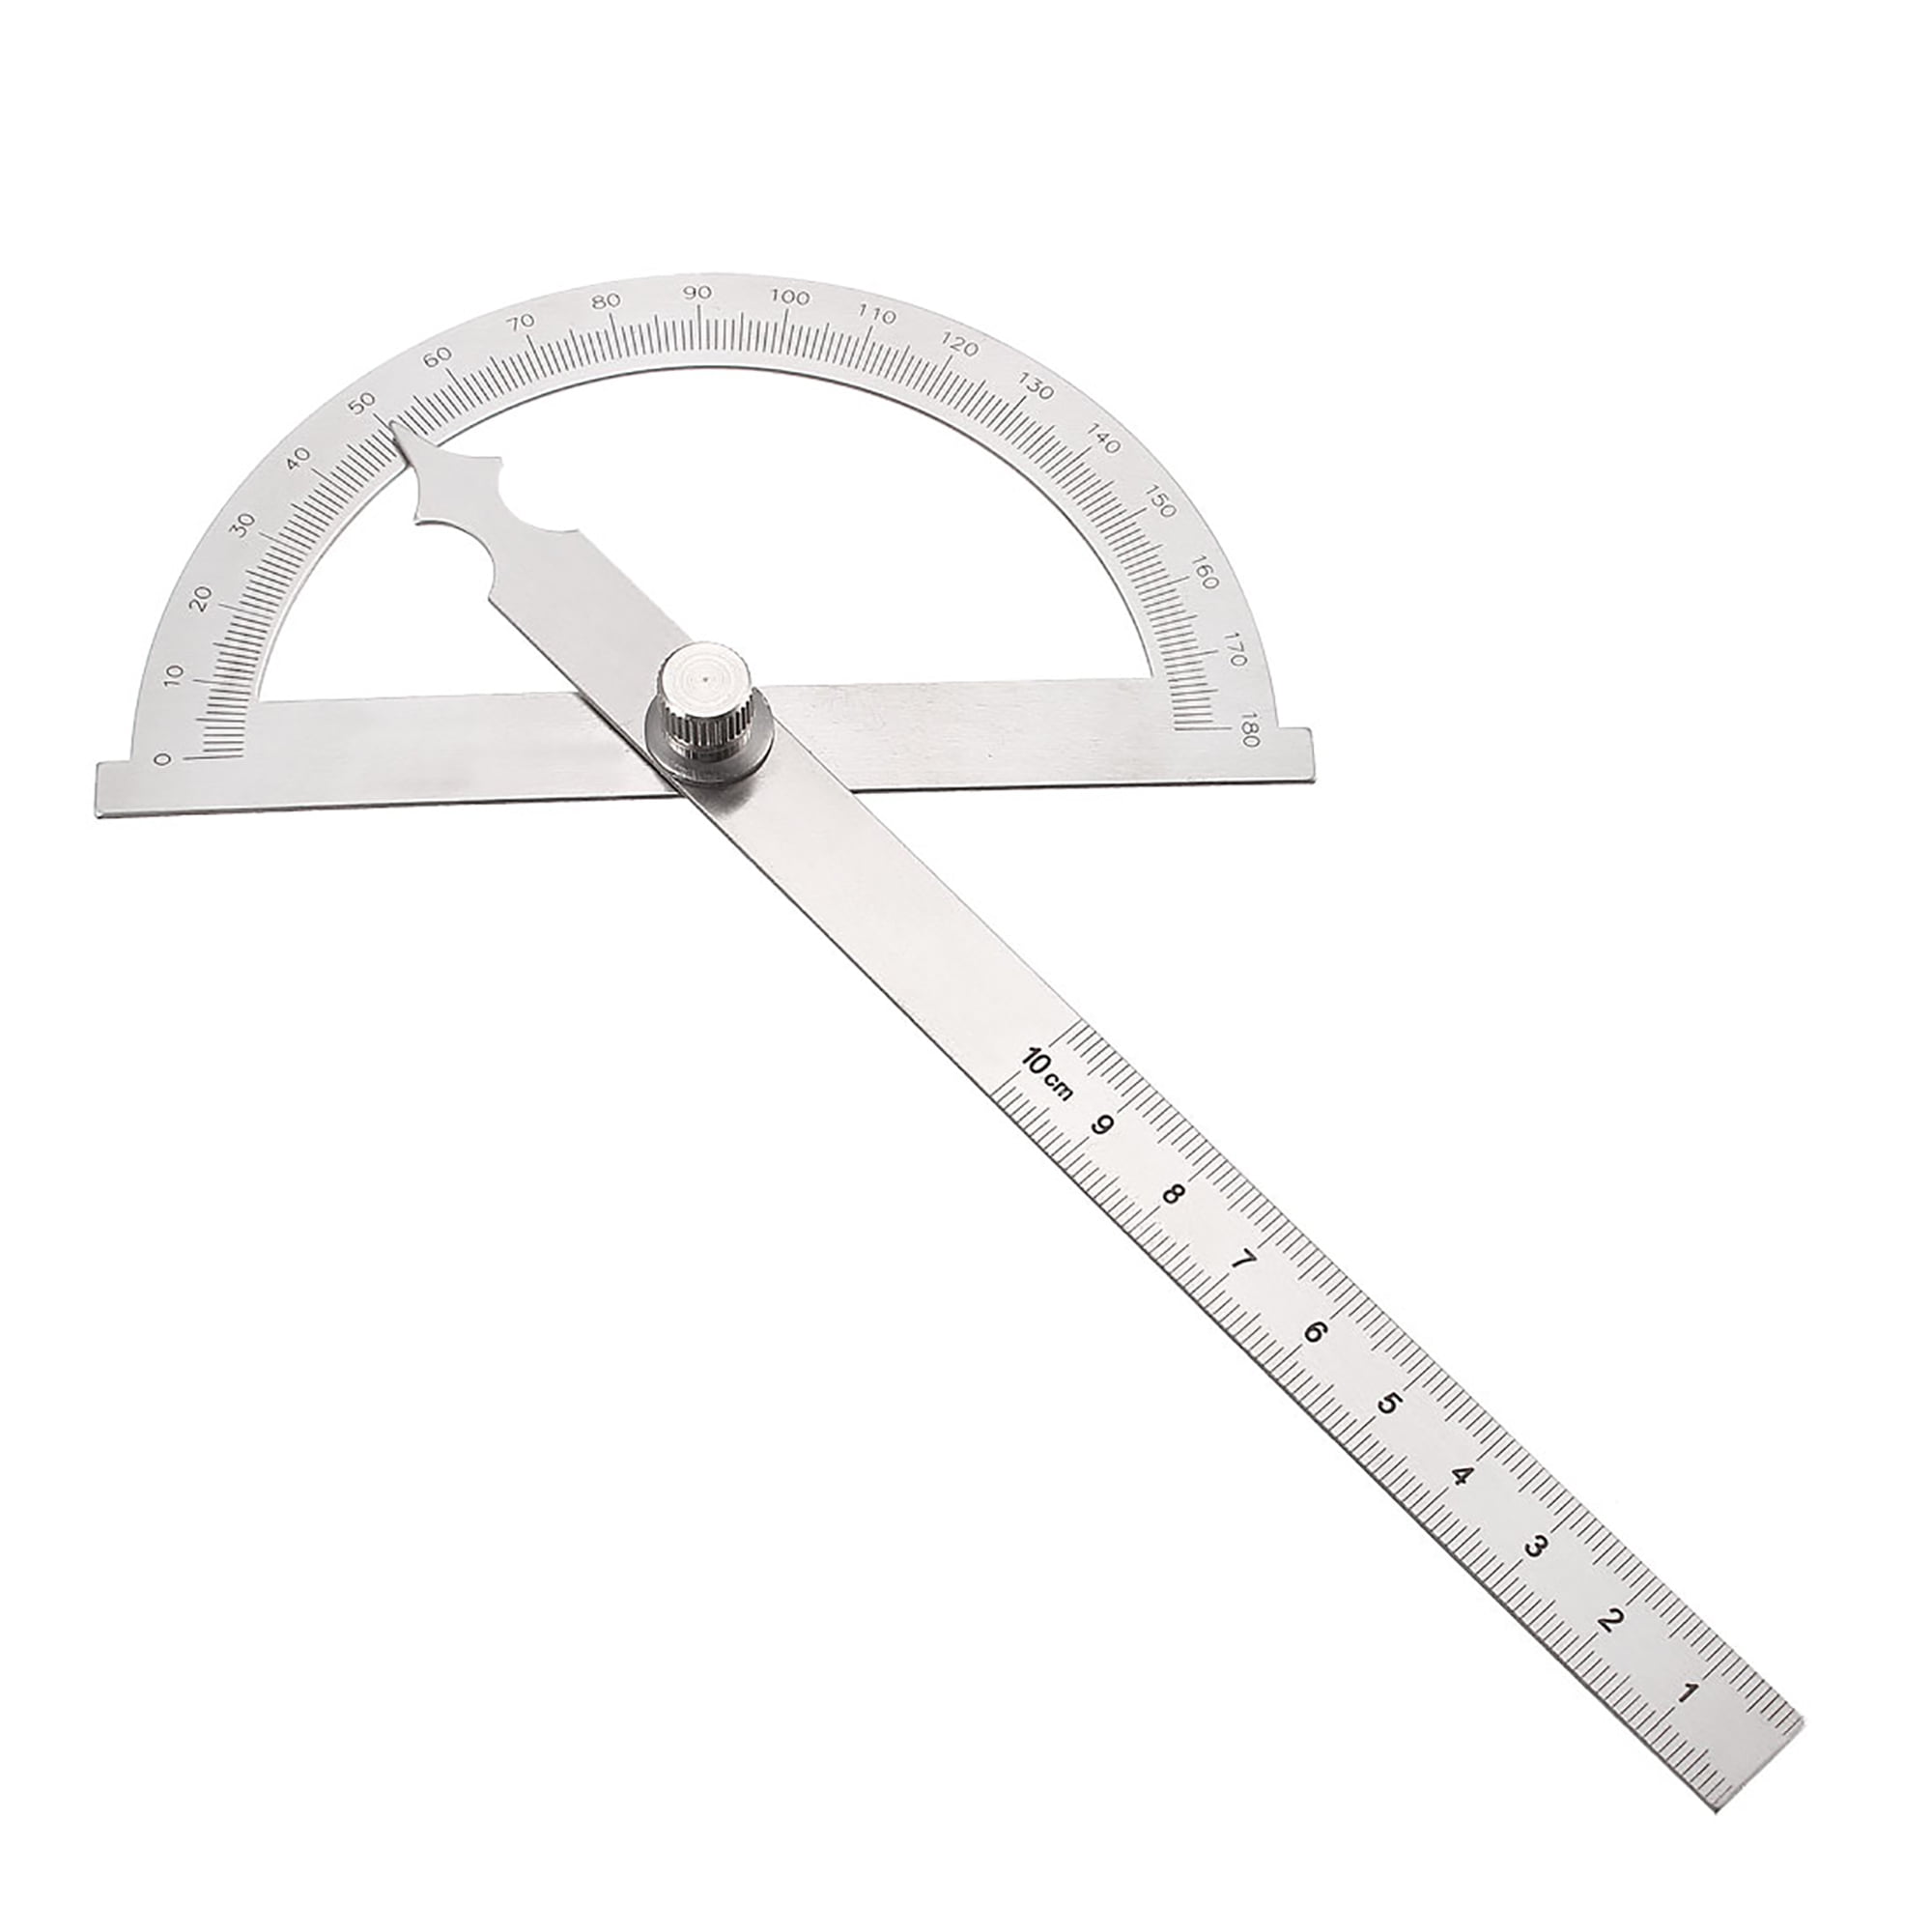 Stainless Steel 0-180° Protractor Round Head Rotary Angle Rule Finder Arm Ruler 